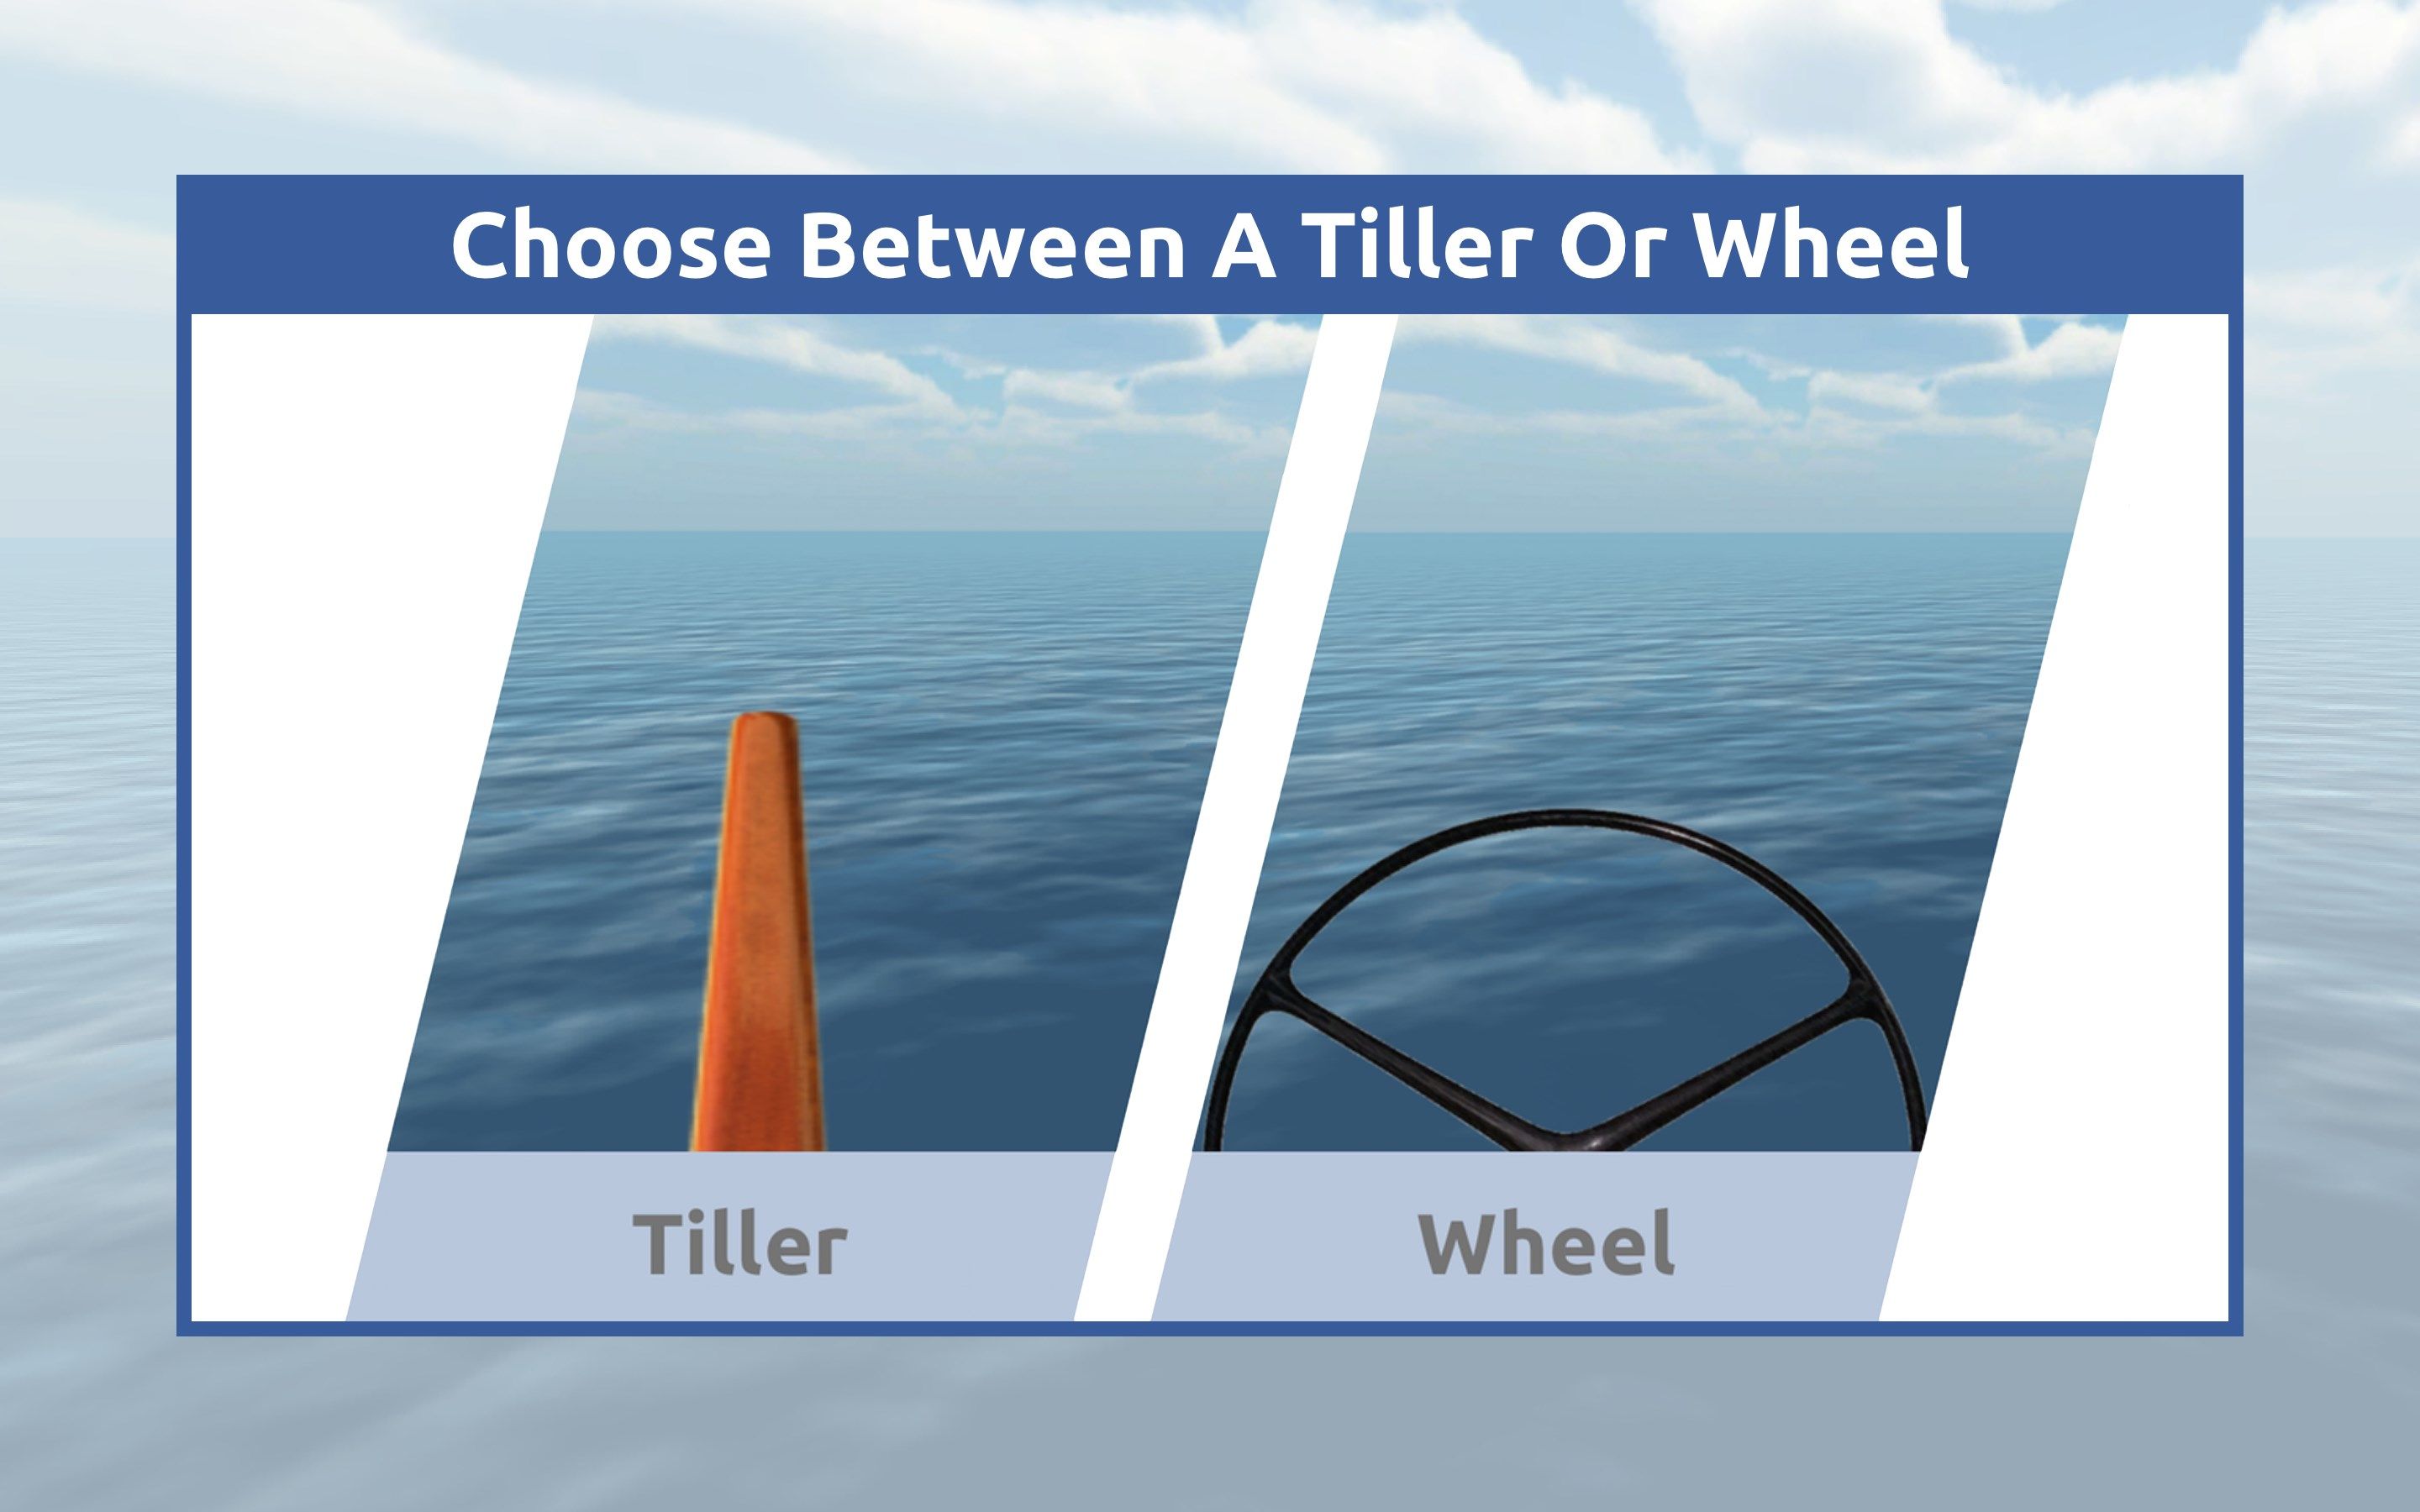 Now you can choose to drive your boat with a tiller or a wheel! If you’re a veteran of Sailing Challenge you’re going to have fun relearning how to sail with a tiller – it’s harder than you think!